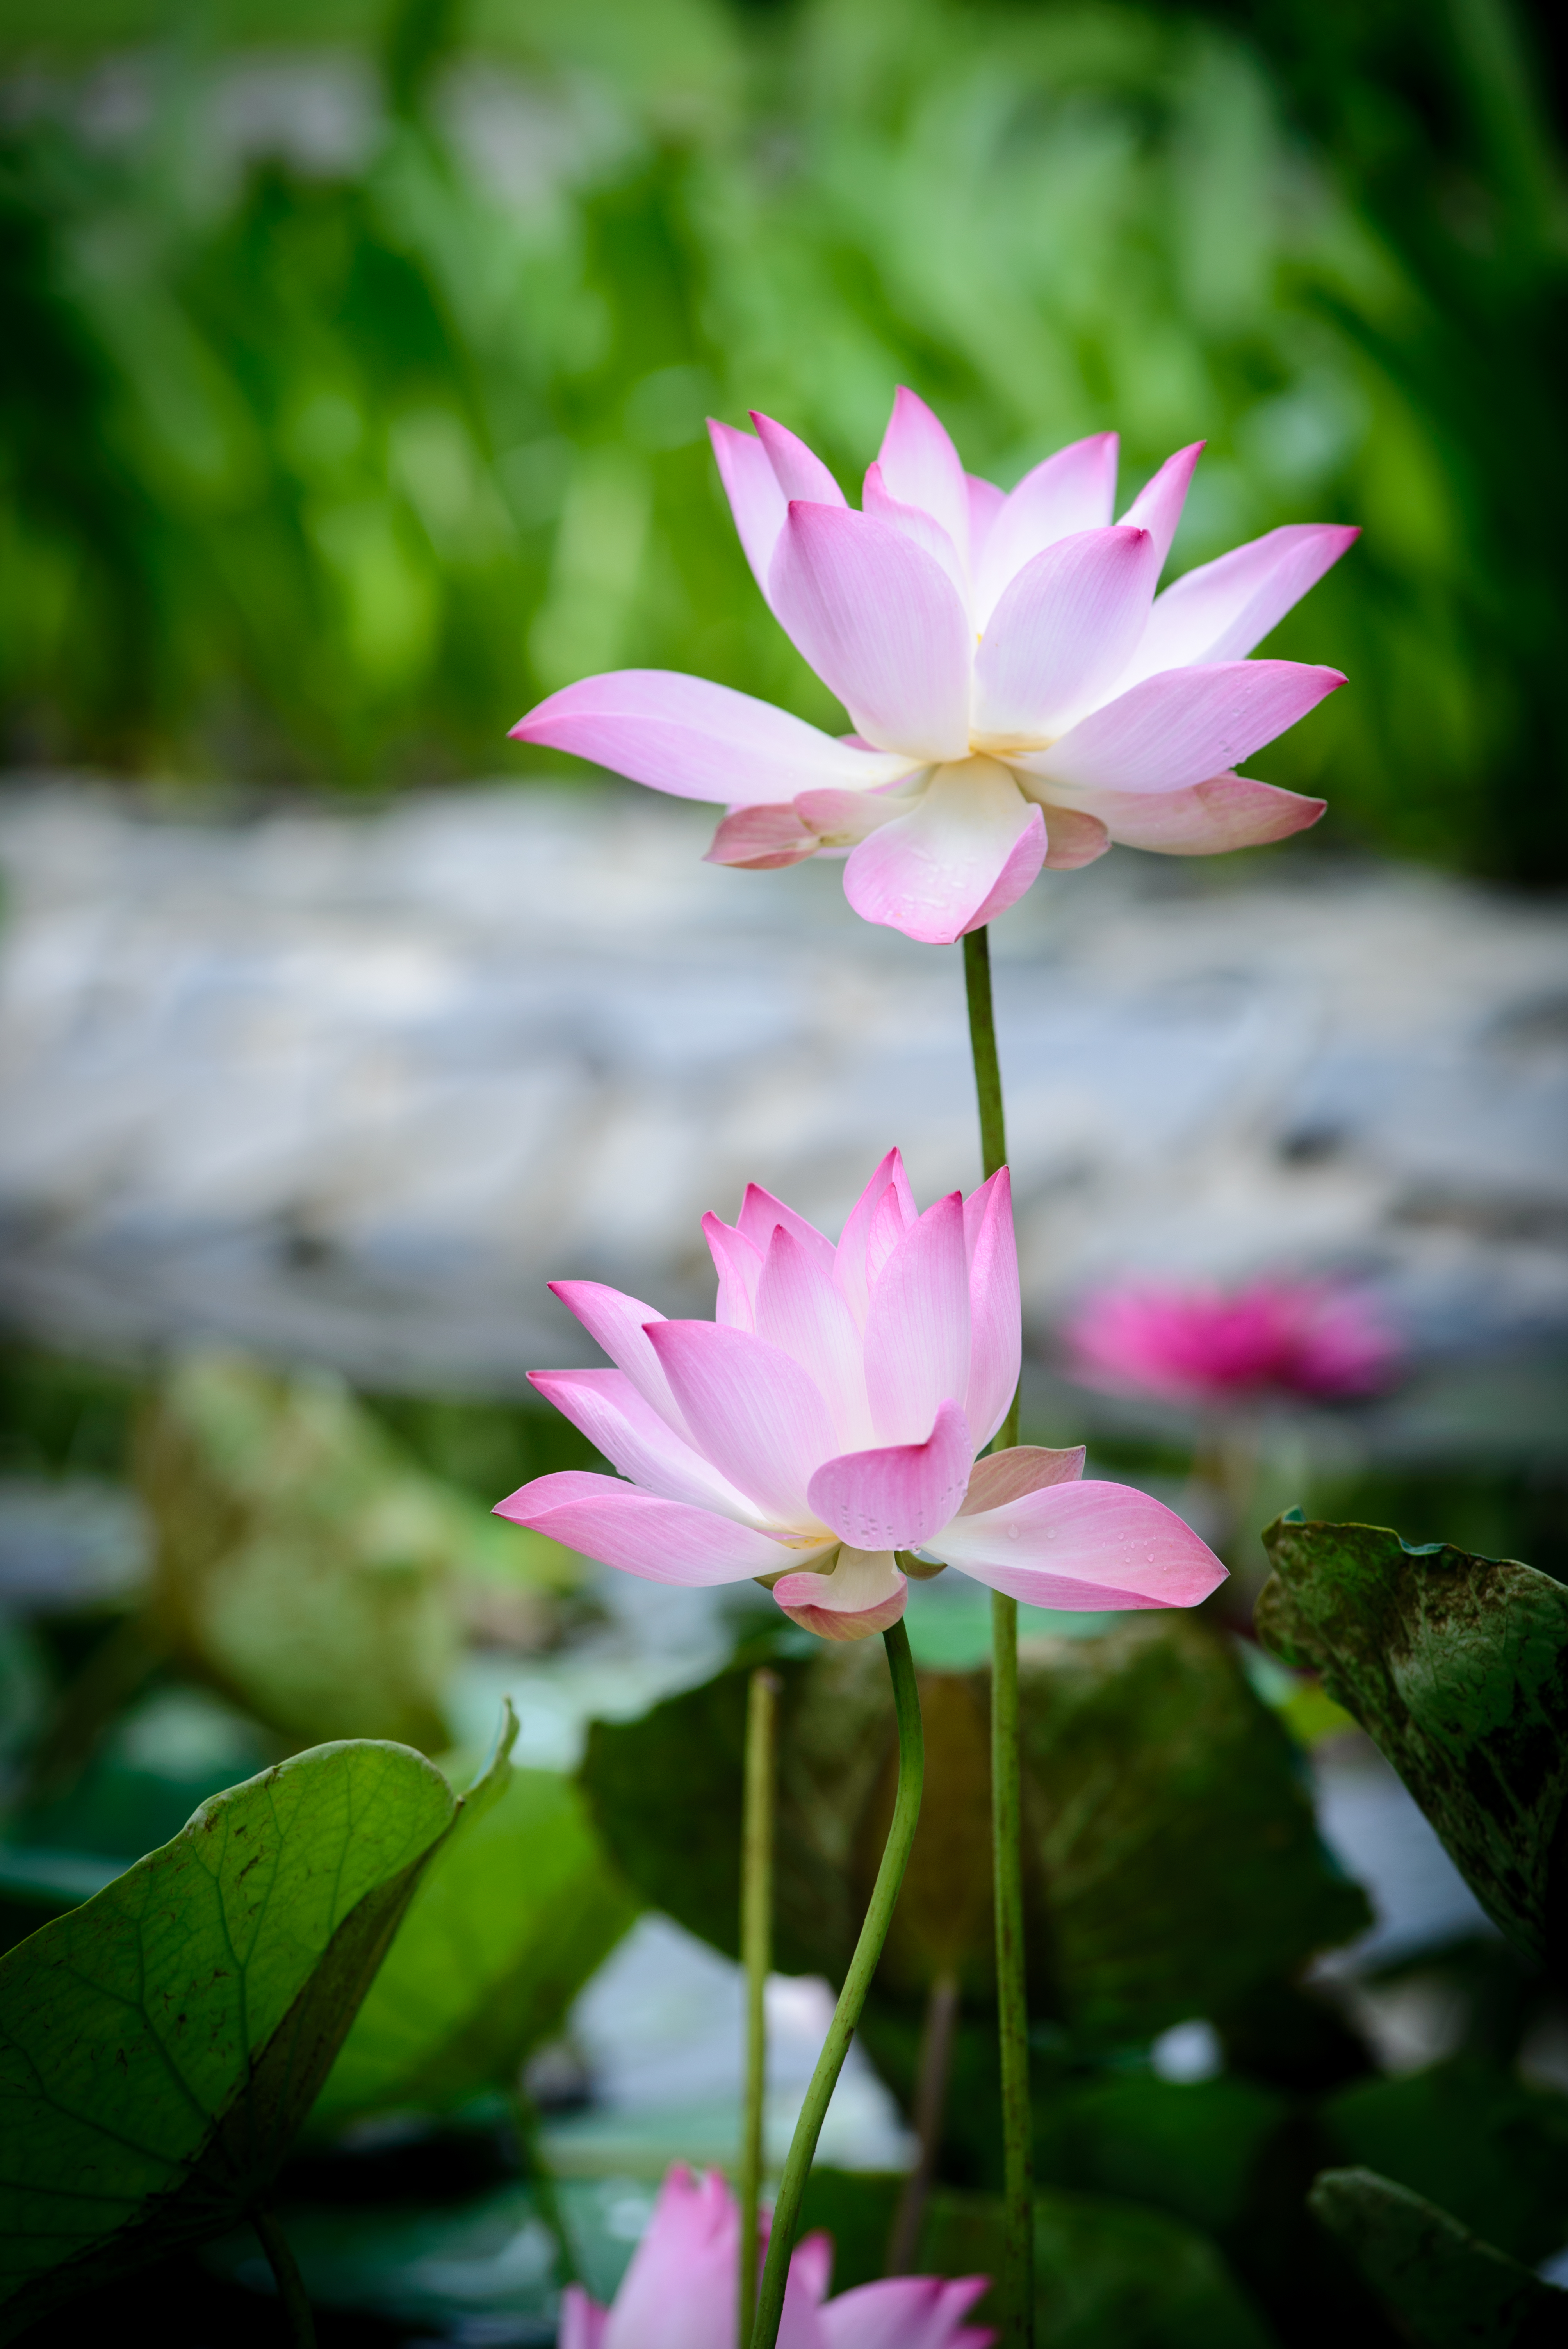 flower,lotus flower,pretty,beautiful,picturesque,fine,pleasant,nature,pink,tree,leaf,green,macro,plant,Lotus,sacred lotus,flora,aquatic plant,lotus family,flowering plant,petal,proteales,spring,wildflower,water,plant stem,sunlight,computer wallpaper,annual plant,blossom,free Images,flowers